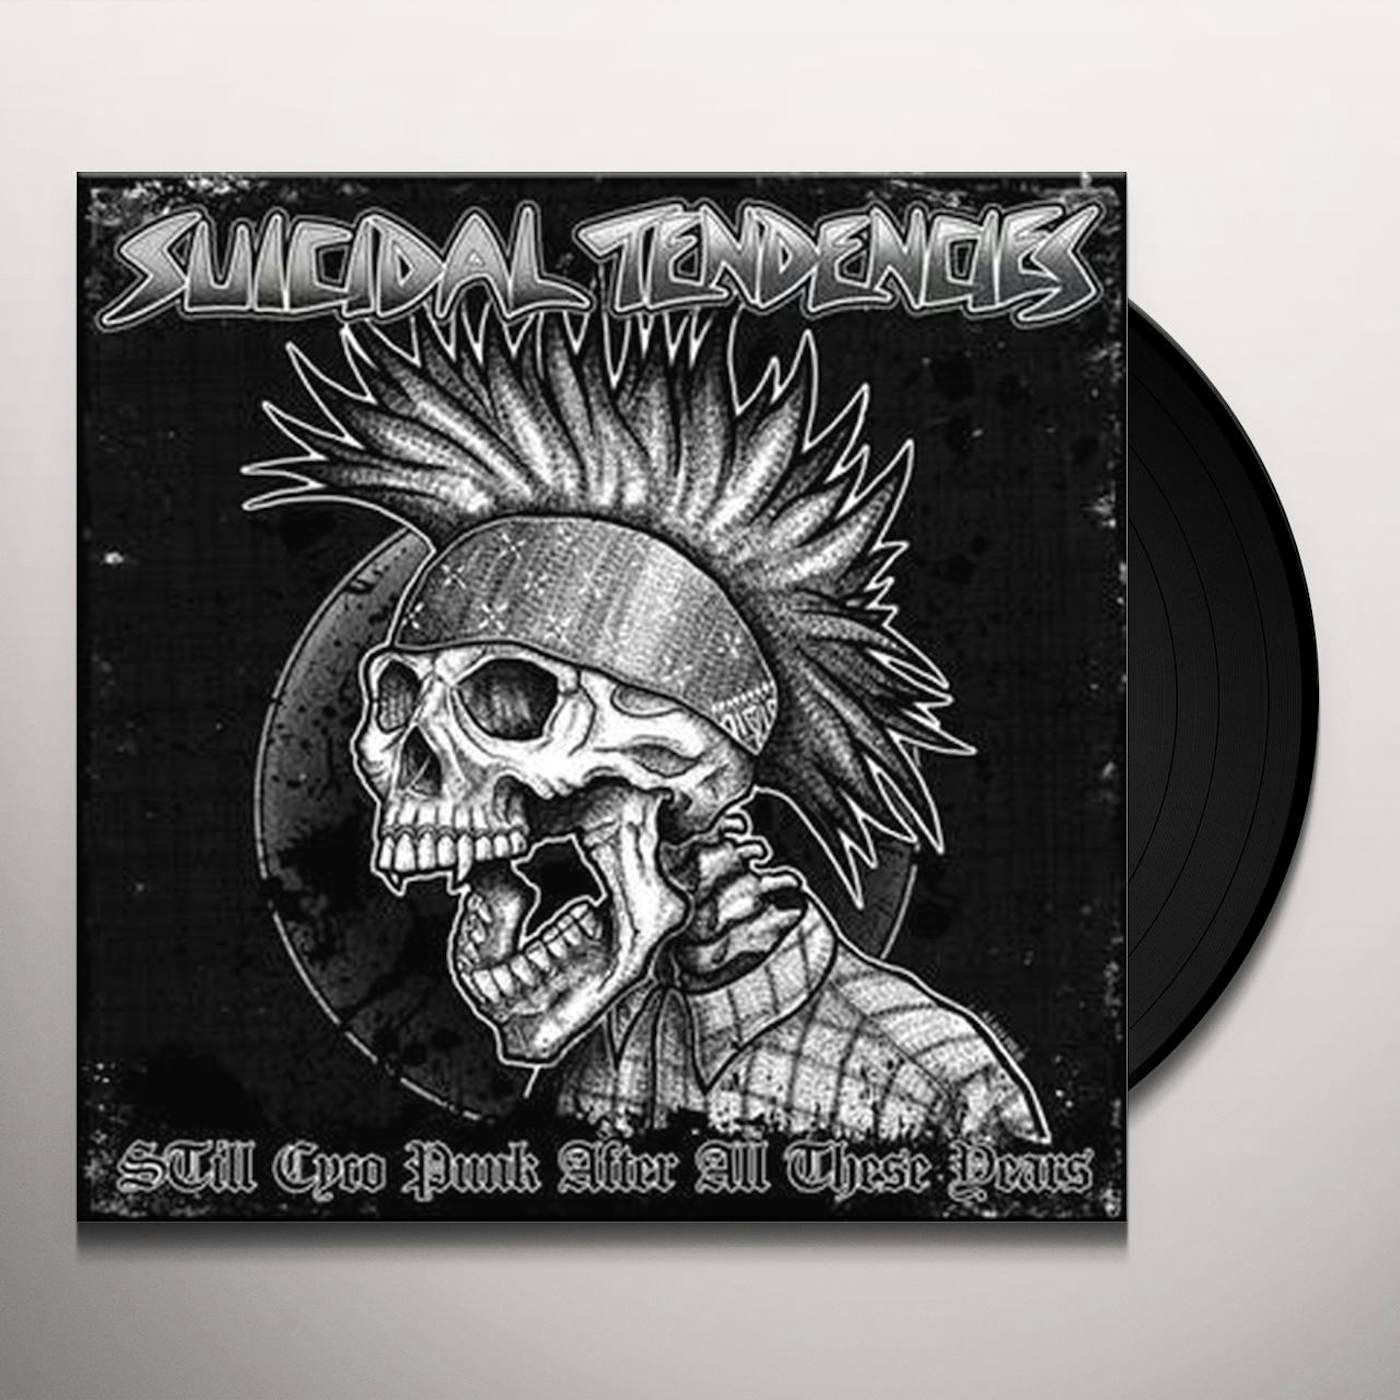 Suicidal Tendencies STILL CYCO PUNK AFTER ALL THESE YEARS (OPAQUE PURPLE VINYL/DL CODE) Vinyl Record